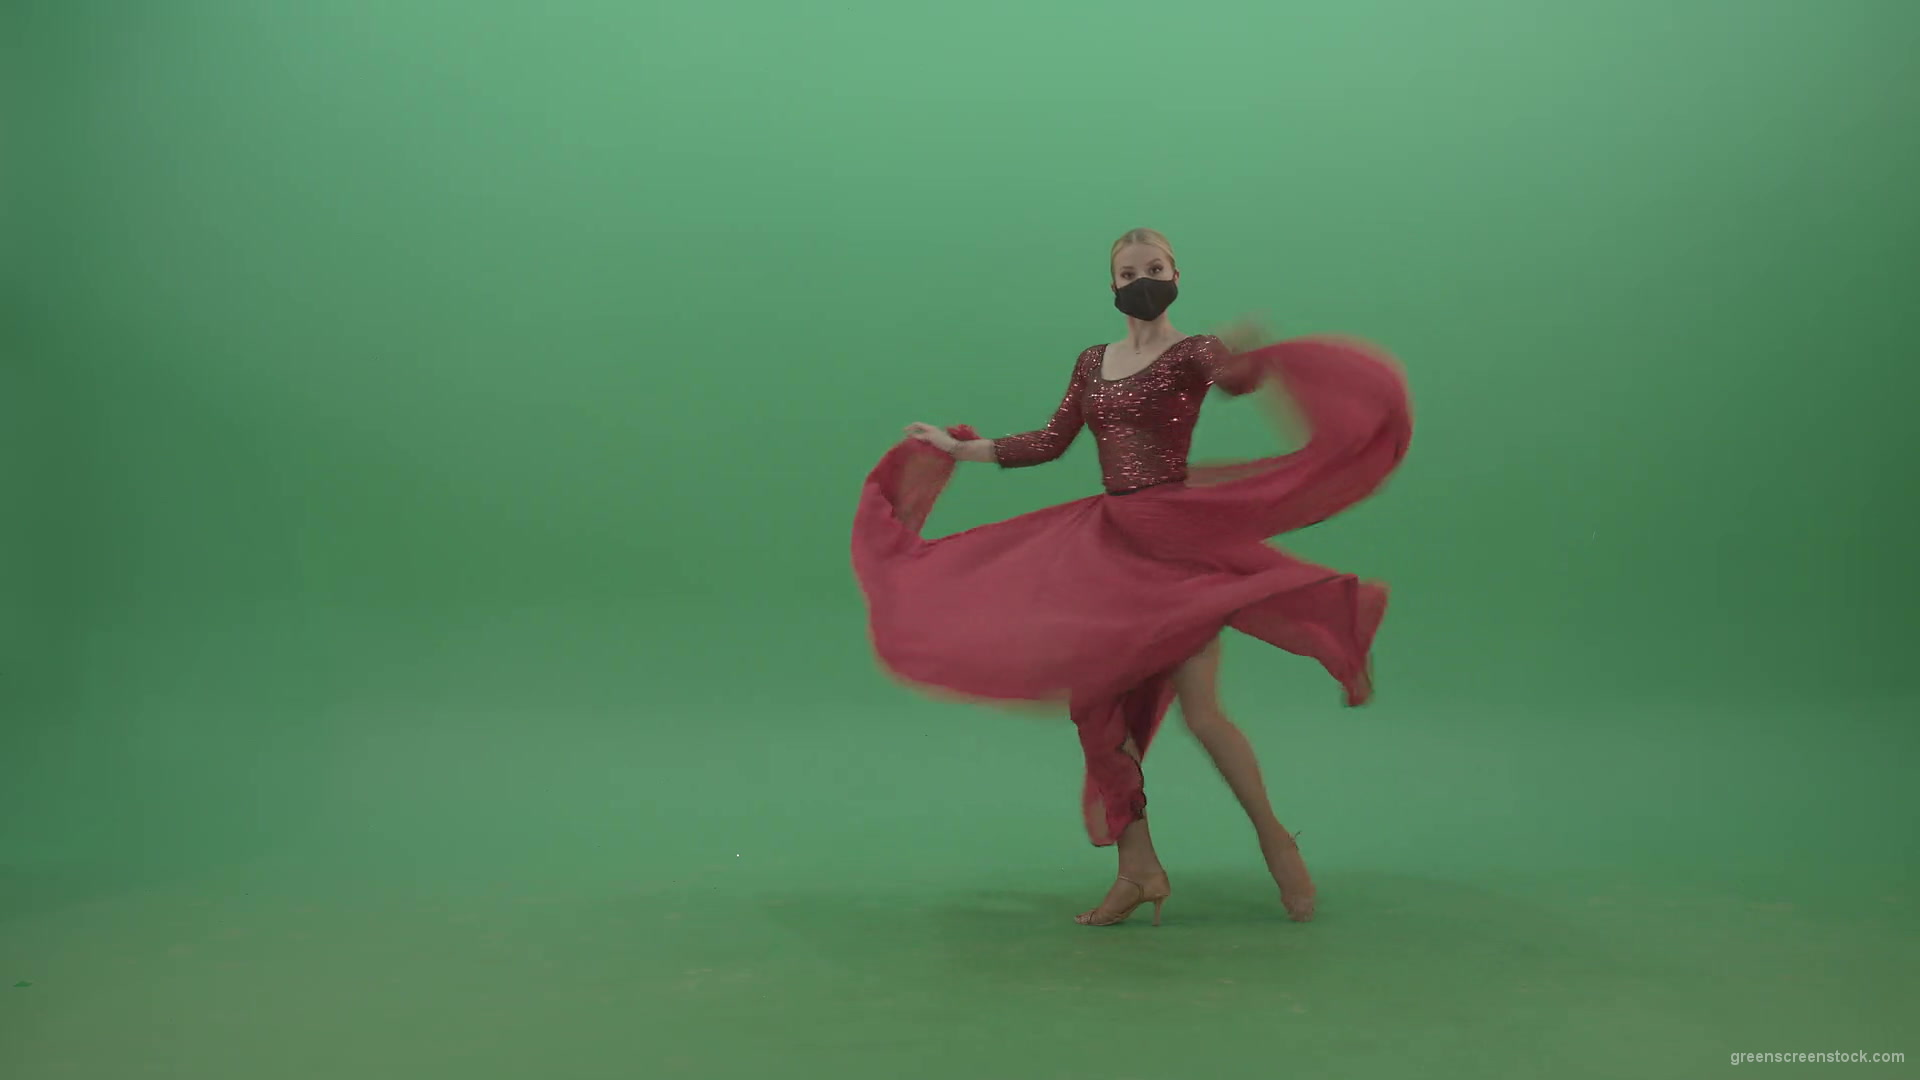 Blonde-Girl-in-red-Flamenco-Dress-makes-spinning-bowing-isolated-on-green-screen-4K-Video-Footage-1920_006 Green Screen Stock